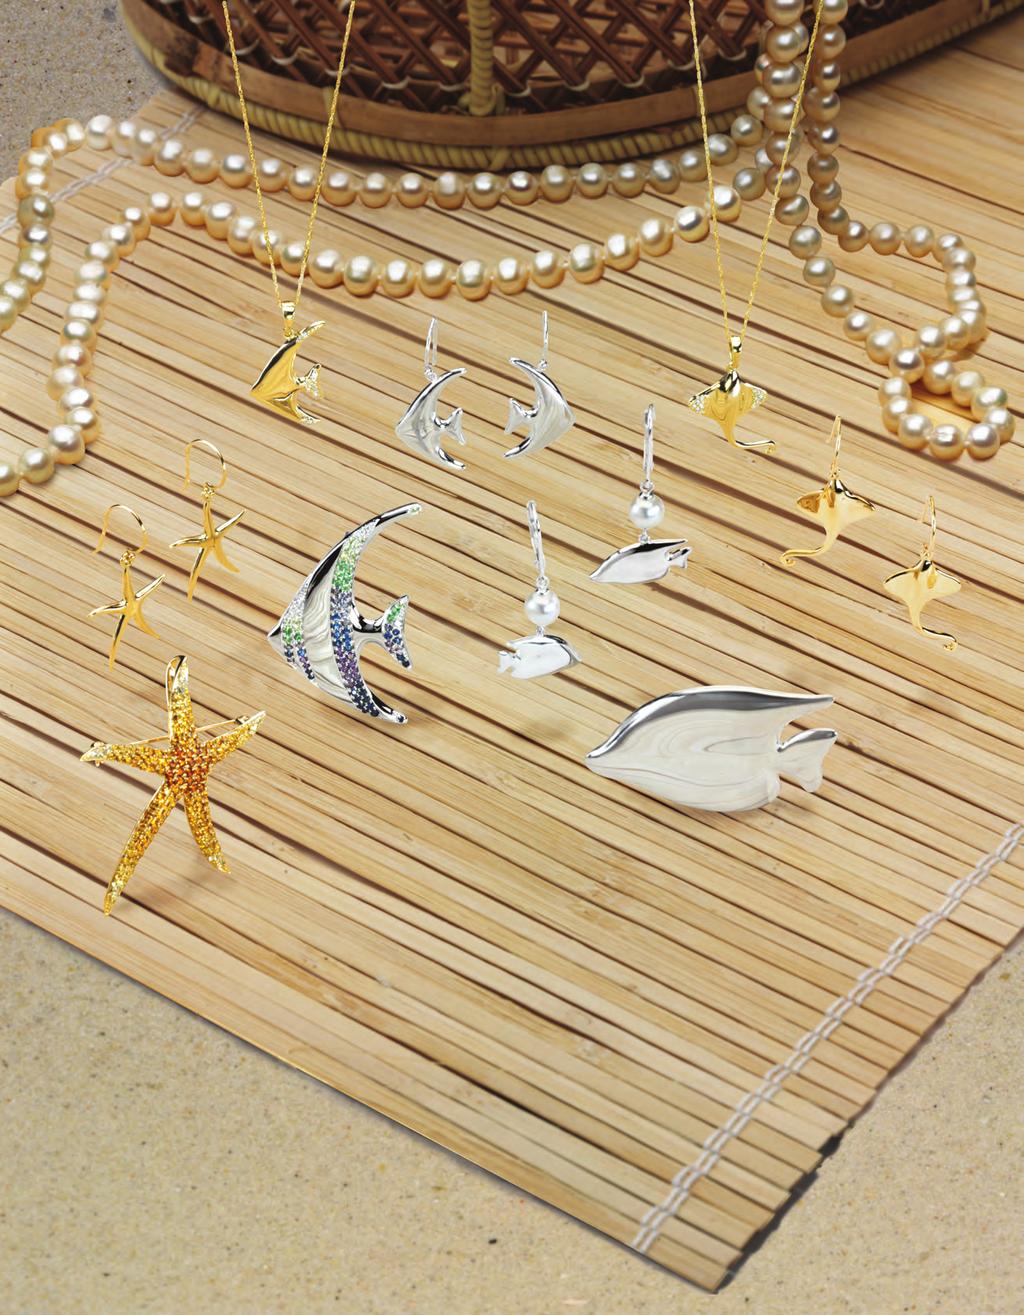 A B C D F H E G J K A. 69212 Diamond Angelfish Necklace,.06 ct tw, 14kt yellow, 33, 18 $532. Mounting #84468 newsea Life in Miniature B. 84526 Angelfish Earrings, 25mm, 14kt white, $878 per pair. C. 69208 Diamond Stingray Necklace,.